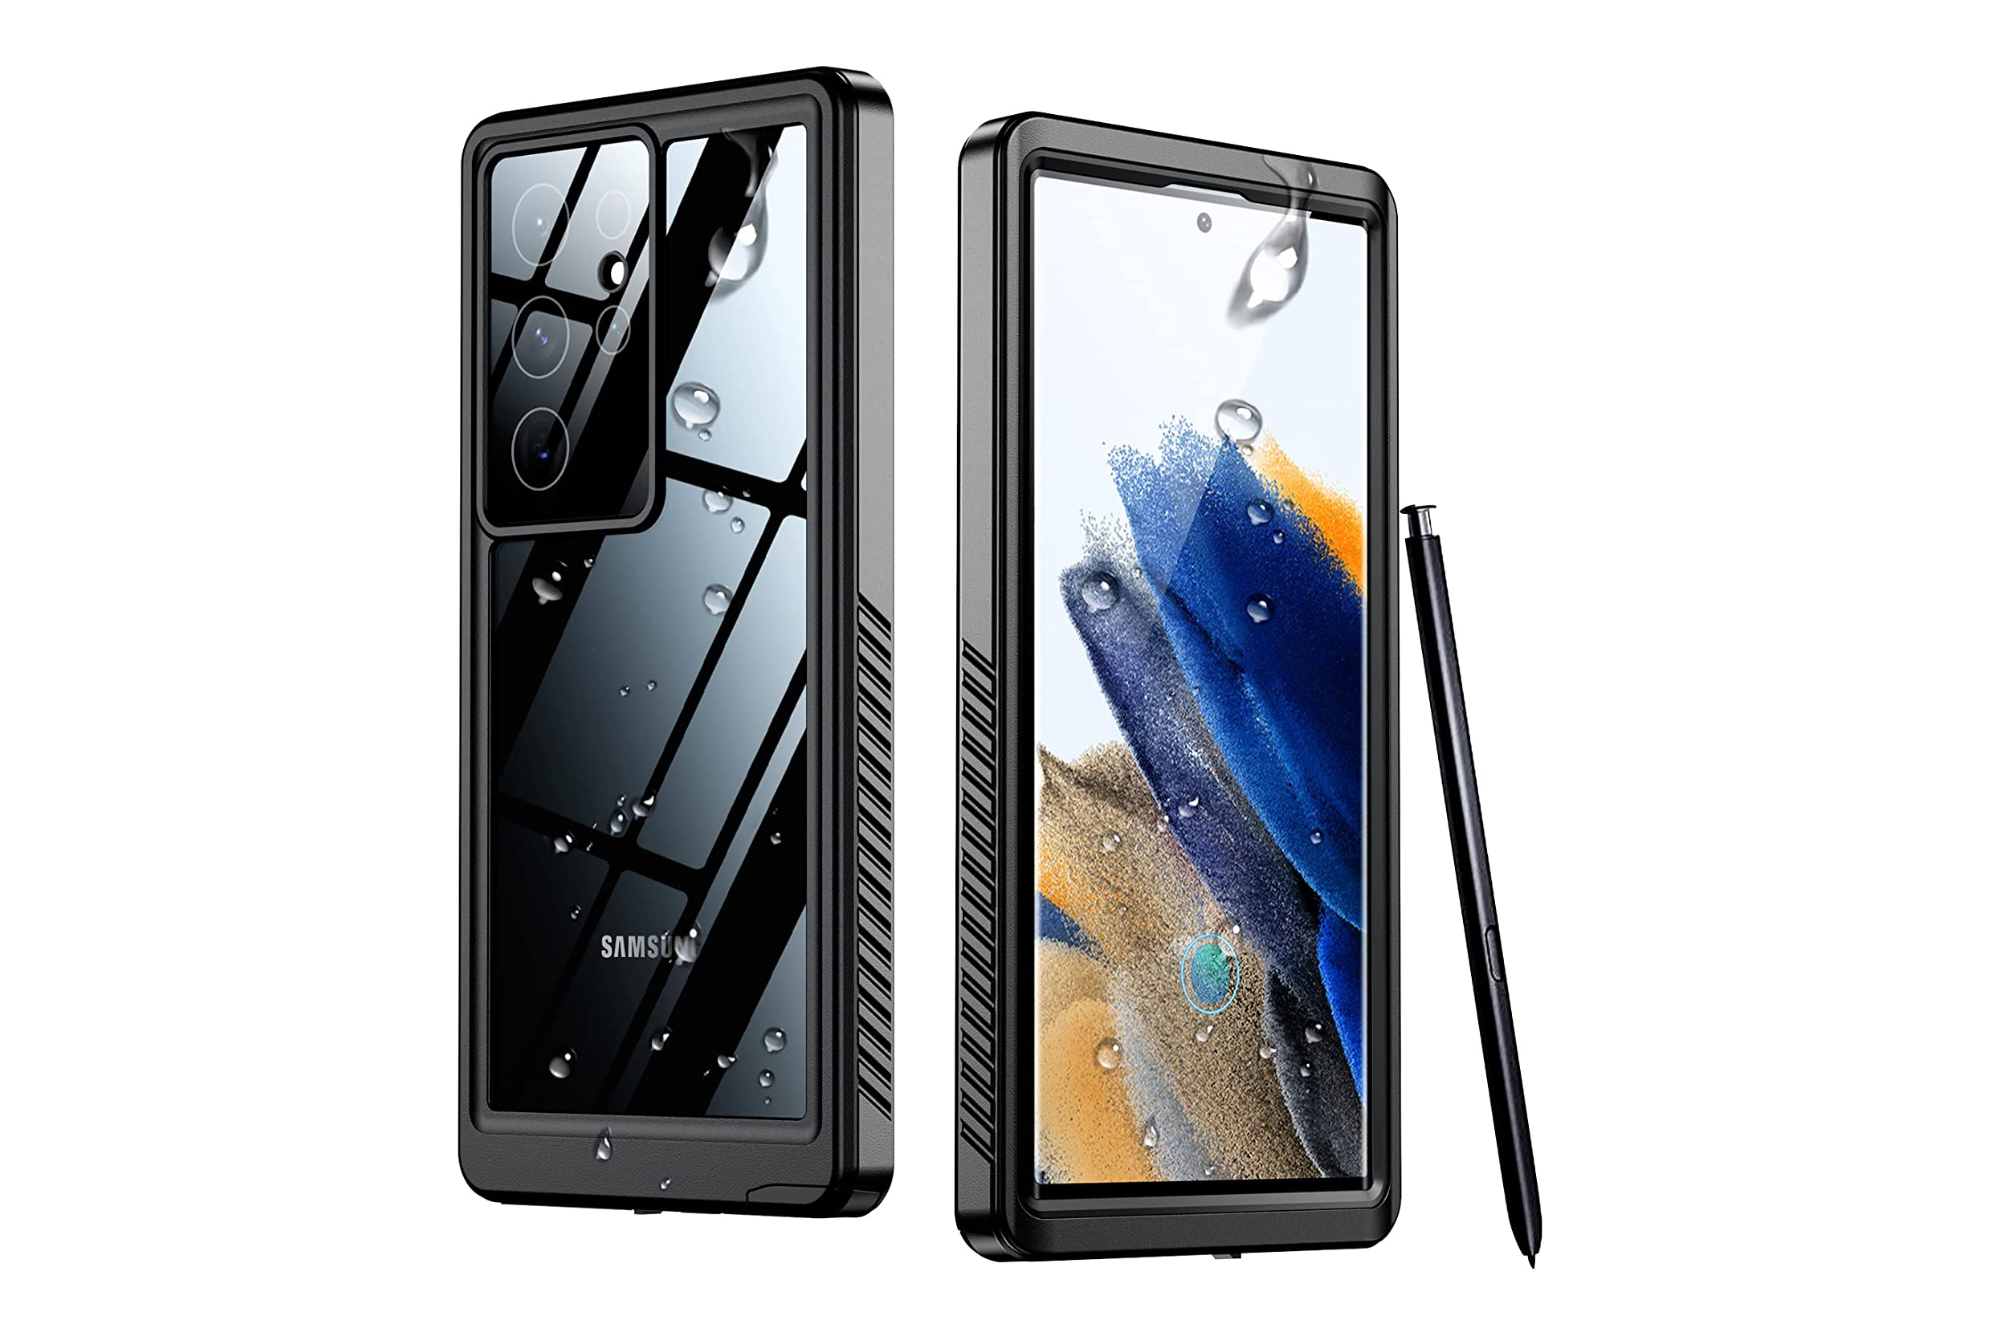 Best thin cases for the Galaxy S23 Ultra in 2023